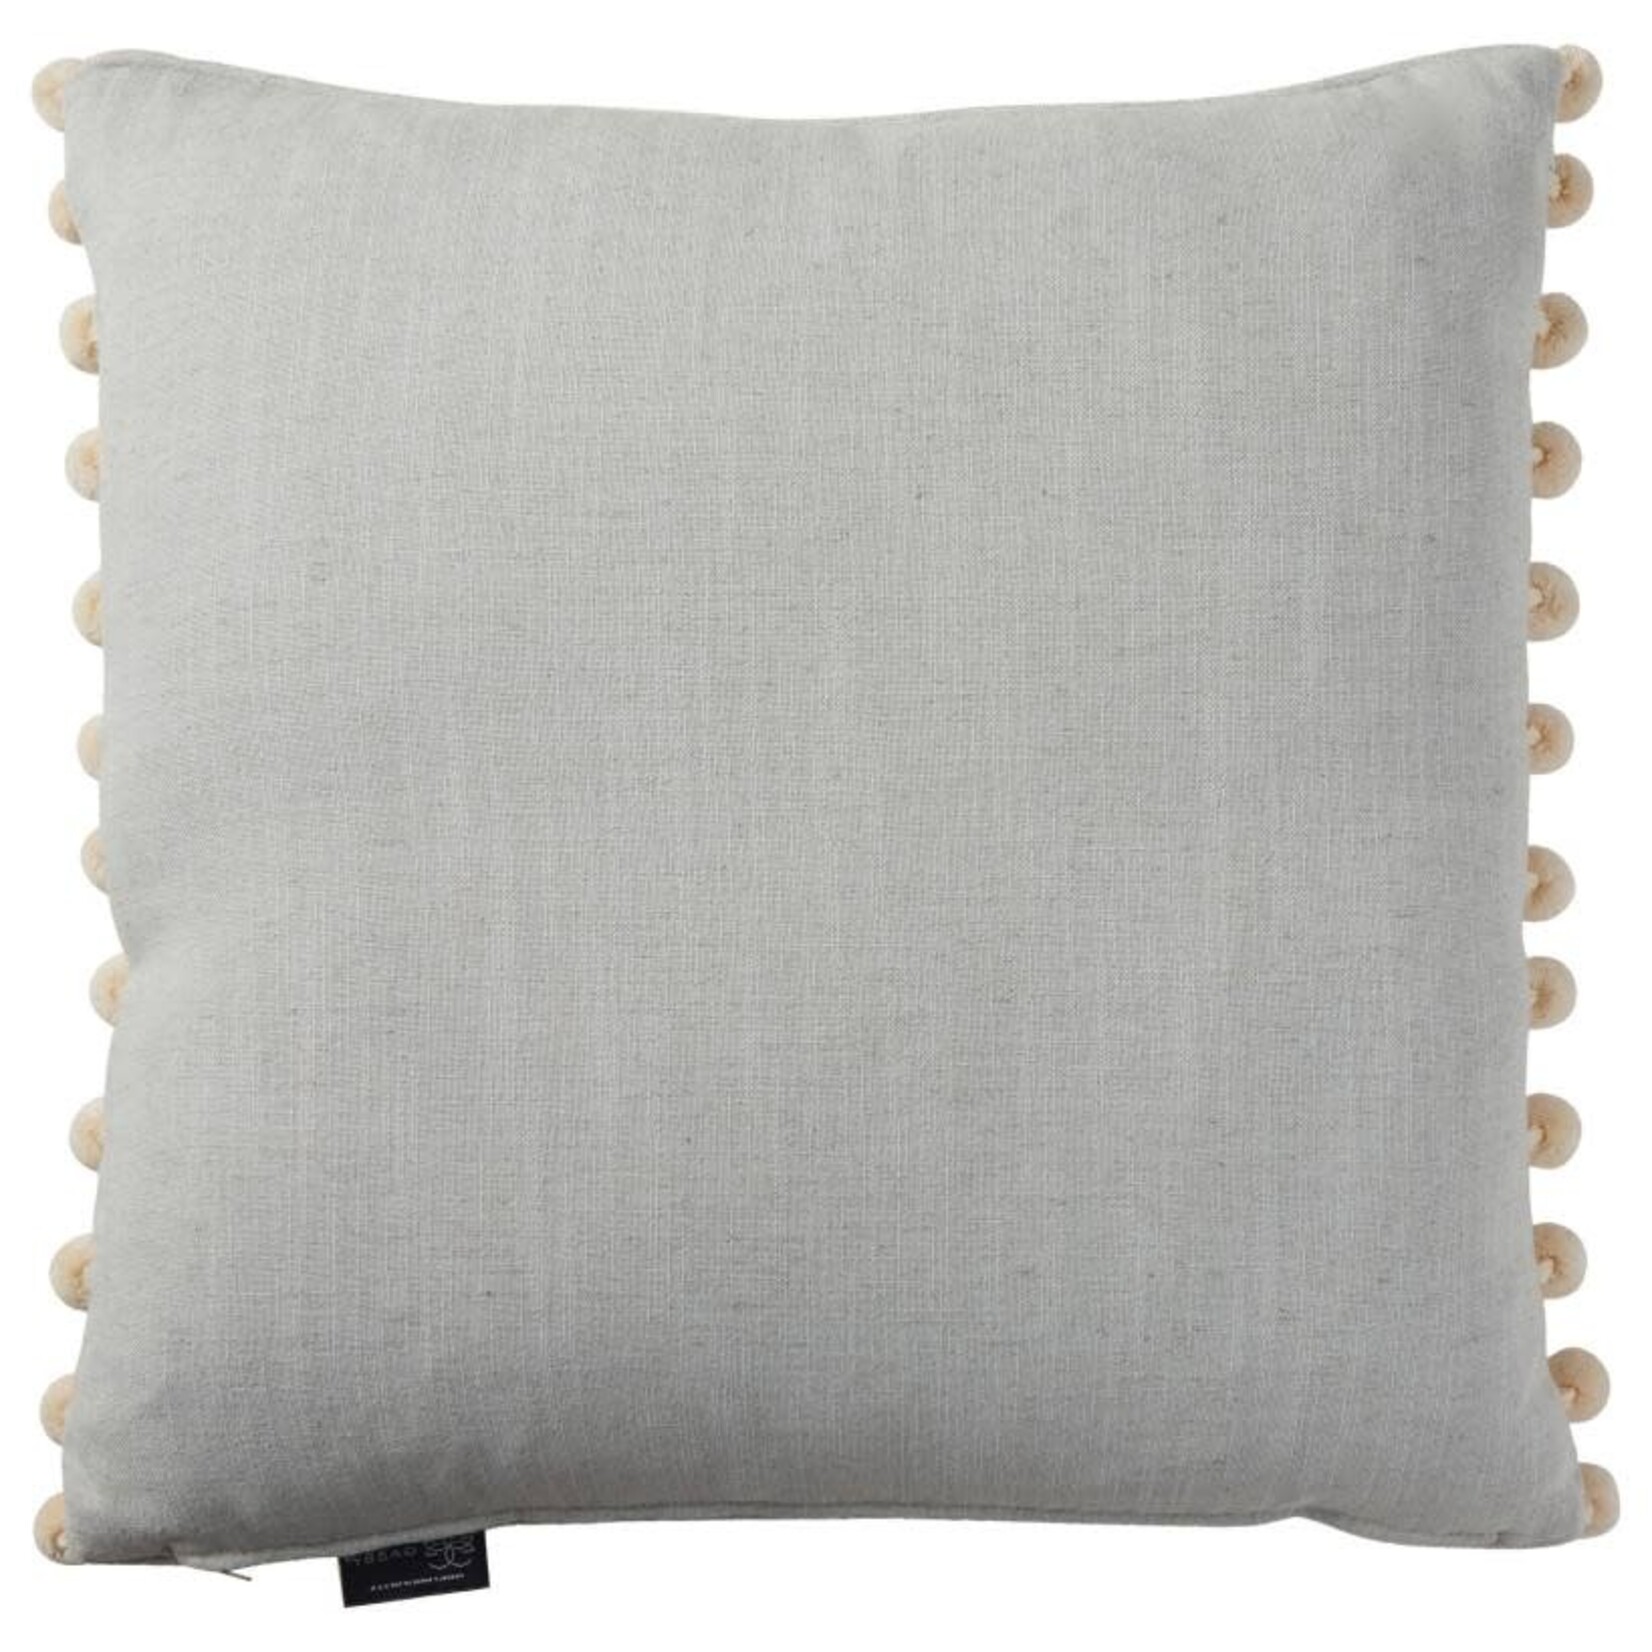 Outside The Box 22x22 Wendy Jane Rosemary Stripe Mineral W/ Pom Poms Feather Down Accent Pillow